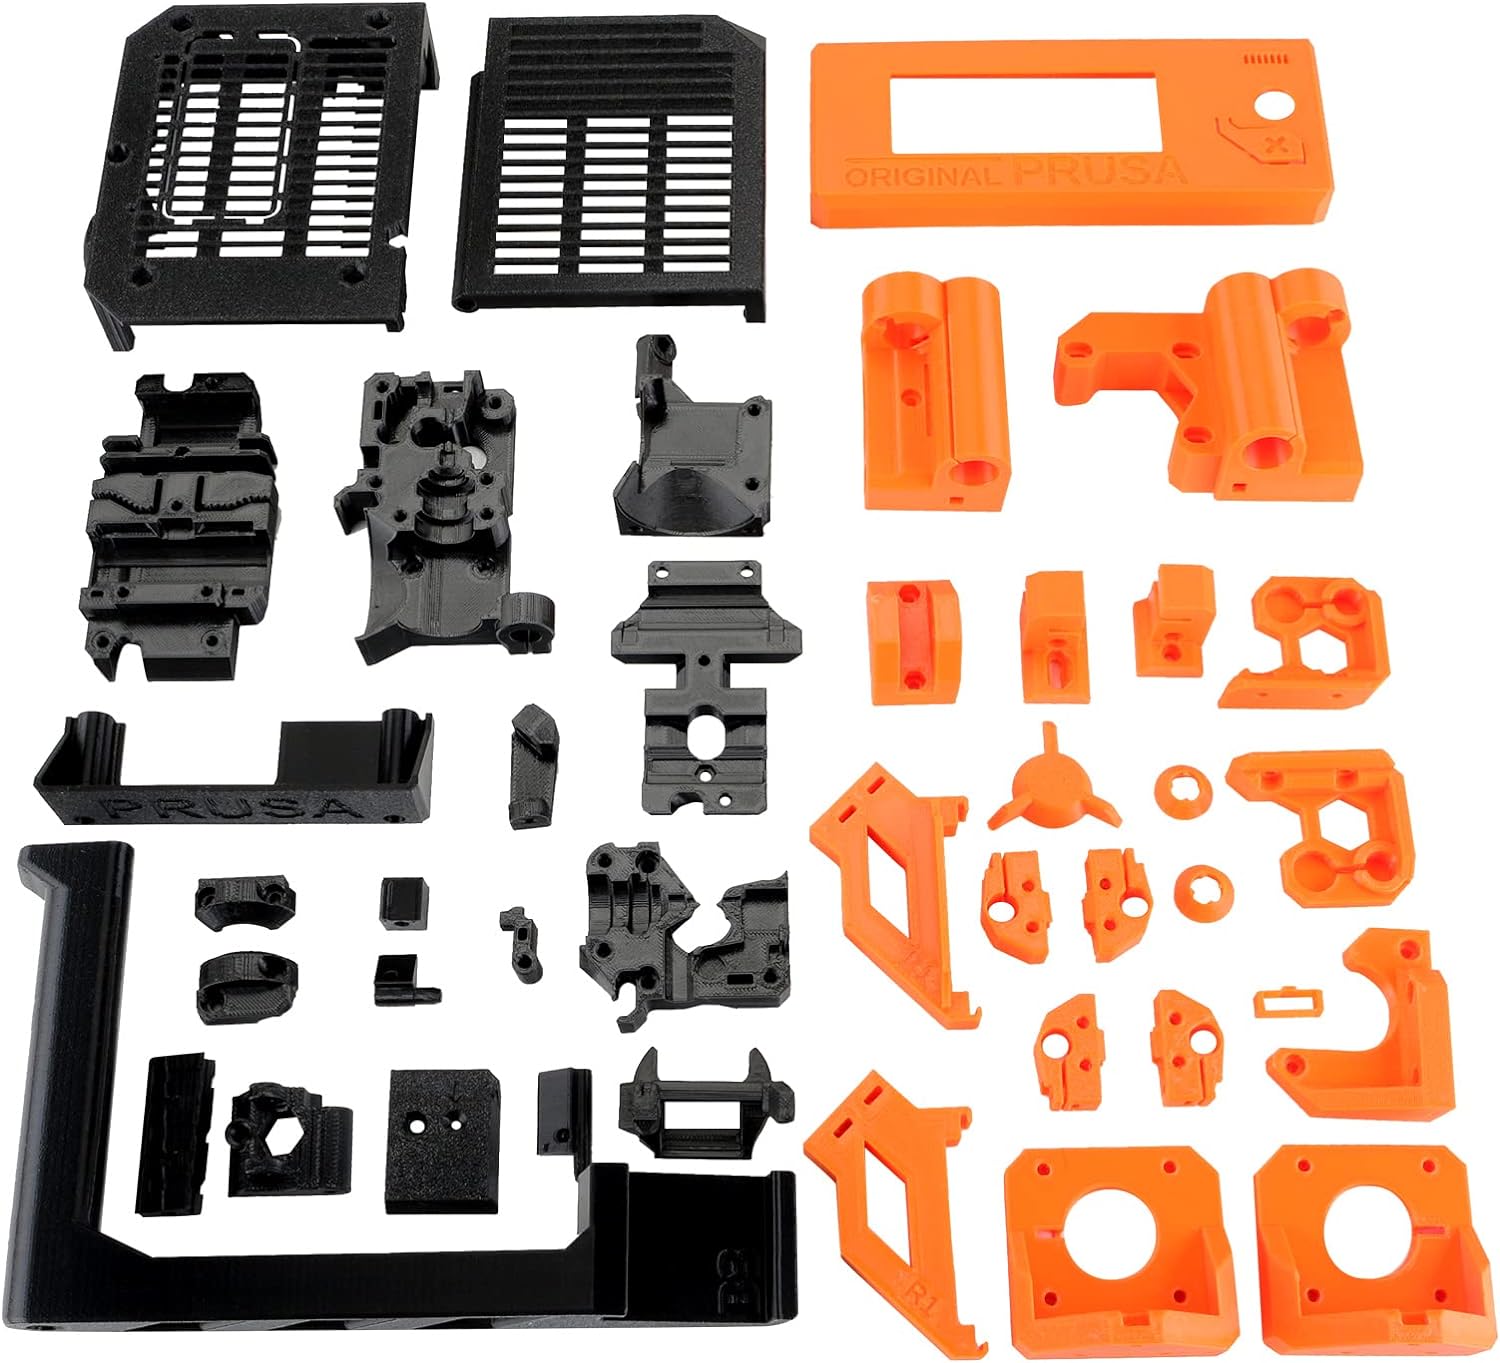 fysetc-prus-i3-mk3s-petg-material-printed-parts-customized-special-3d-printer-kit-for-mk225-mk3-upgrade-to-mk3s-plus FYSETC Prus i3 MK3S+ PETG Material Printed Parts Review